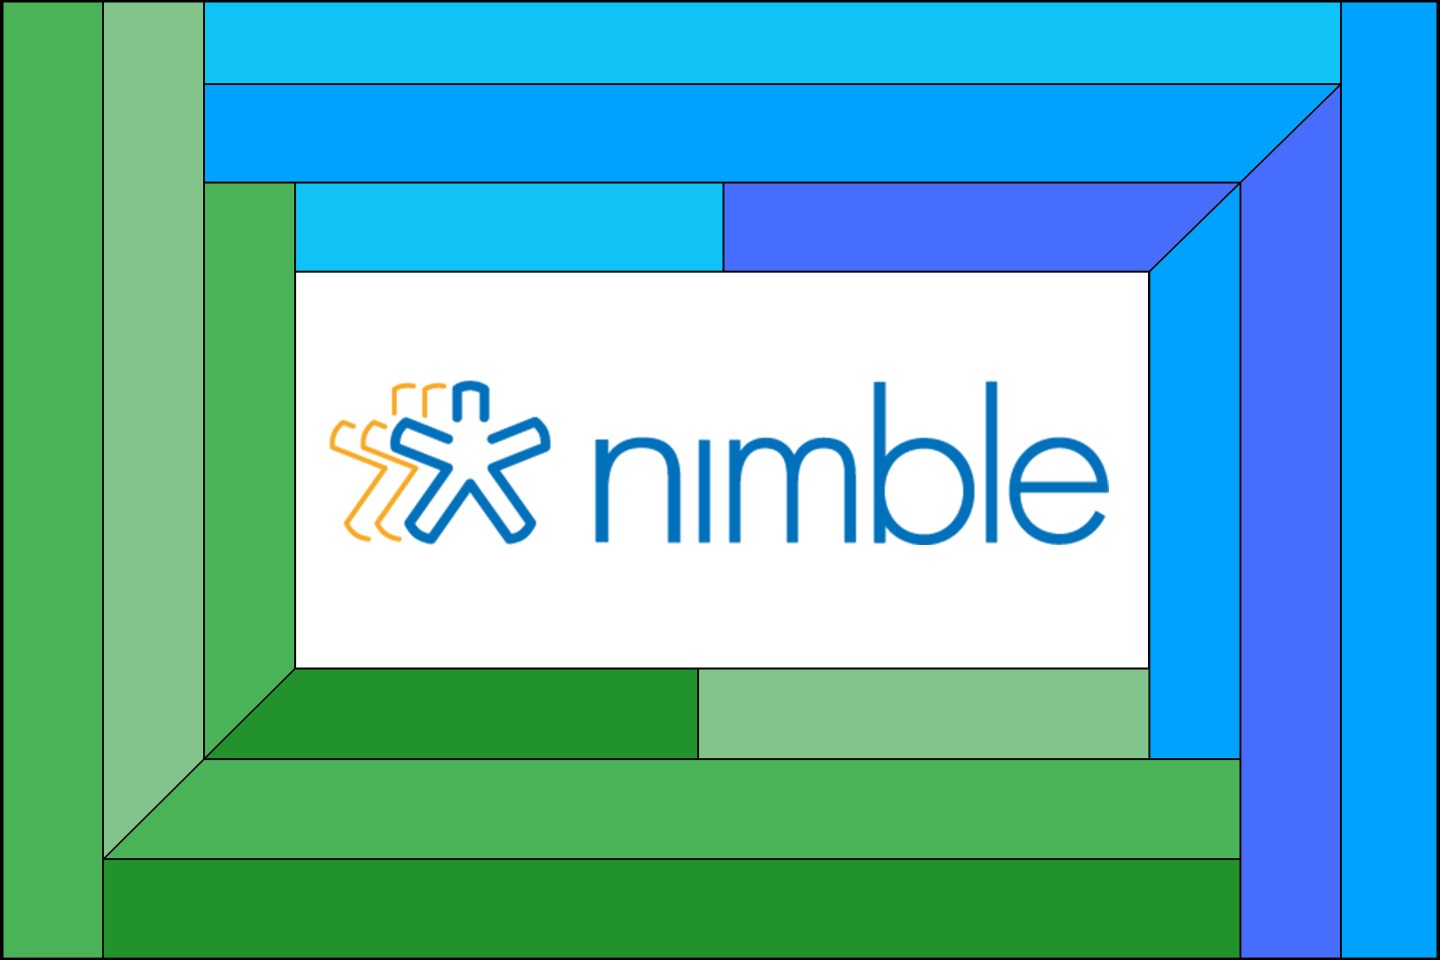 The Nimble CRM logo on a blue and green frame.